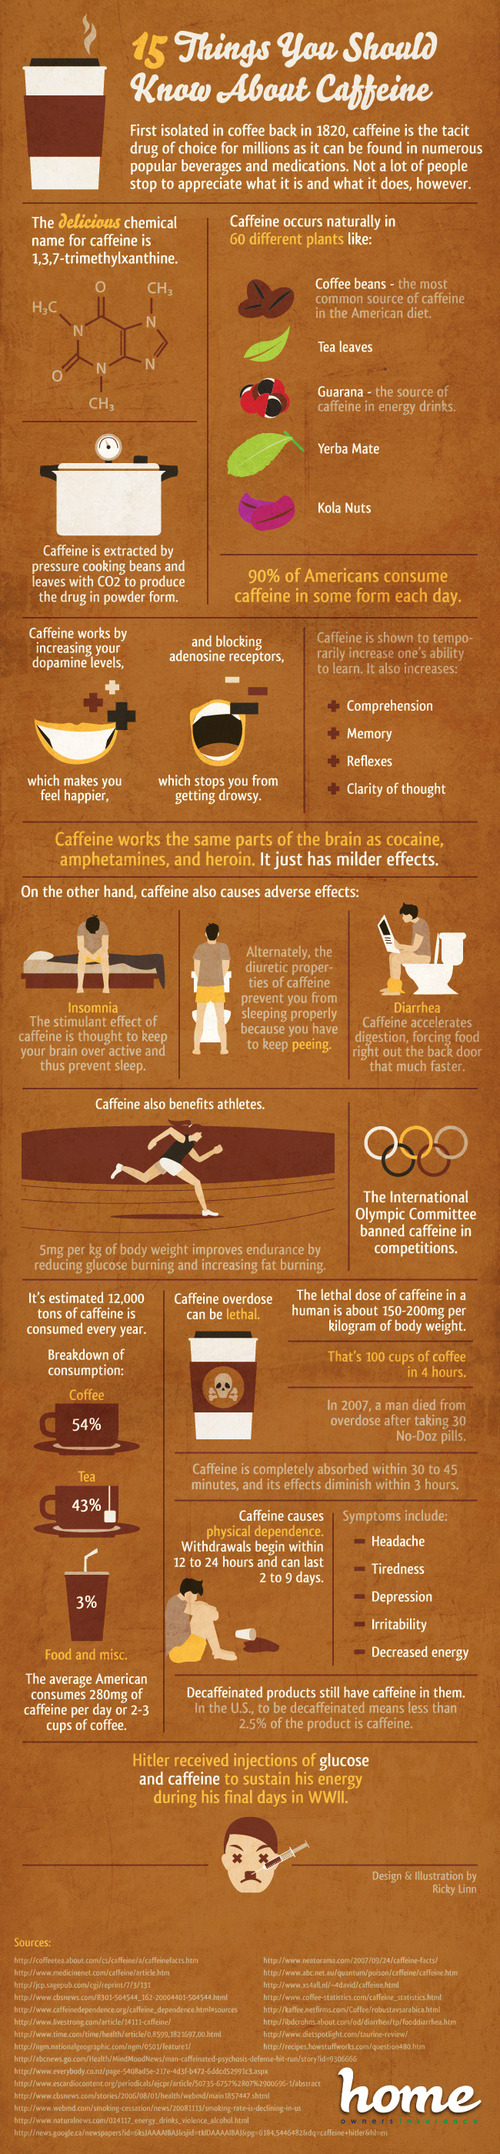 15 things you should know about caffeine - Infográfico de Ricky Linn